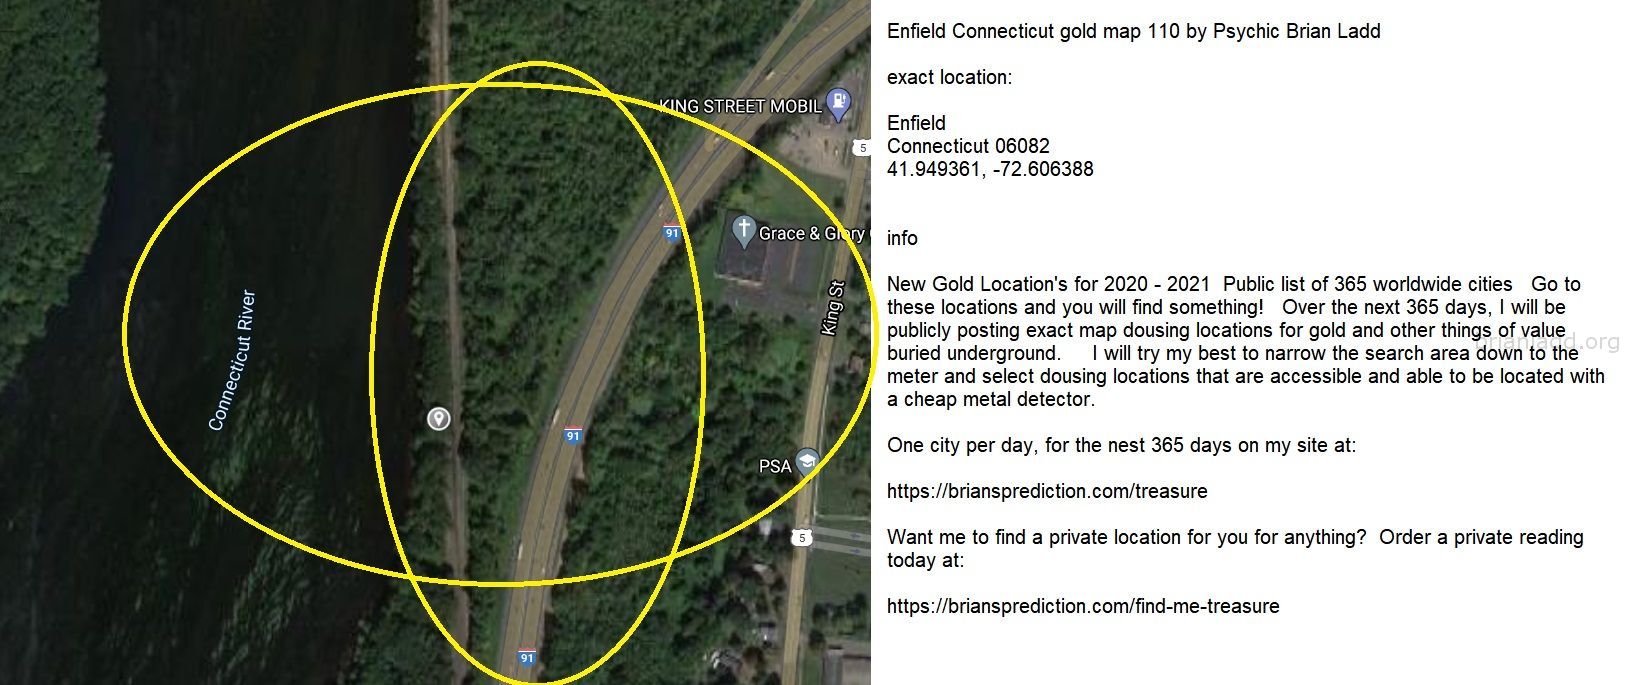 Enfield Connecticut Gold Map 110 By Psychic Brian Ladd - Enfield Connecticut Gold Map 110 By Psychic Brian Ladd  Exact L...
Enfield Connecticut Gold Map 110 By Psychic Brian Ladd  Exact Location:  Enfield  Connecticut 06082  41.949361, -72.606388  Info  New Gold Location'S For 2020 - 2021  Public List Of 365 Worldwide Cities  Go To These Locations And You Will Find Something!  Over The Next 365 Days, I Will Be Publicly Posting Exact Map Dousing Locations For Gold And Other Things Of Value Buried Underground.  I Will Try My Best To Narrow The Search Area Down To The Meter And Select Dousing Locations That Are Accessible And Able To Be Located With A Cheap Metal Detector.  One City Per Day, For The Nest 365 Days On My Site At:   https://briansprediction.com/Treasure  Want Me To Find A Private Location For You For Anything?  Order A Private Reading Today At:   https://briansprediction.com/Find-Me-Treasure
